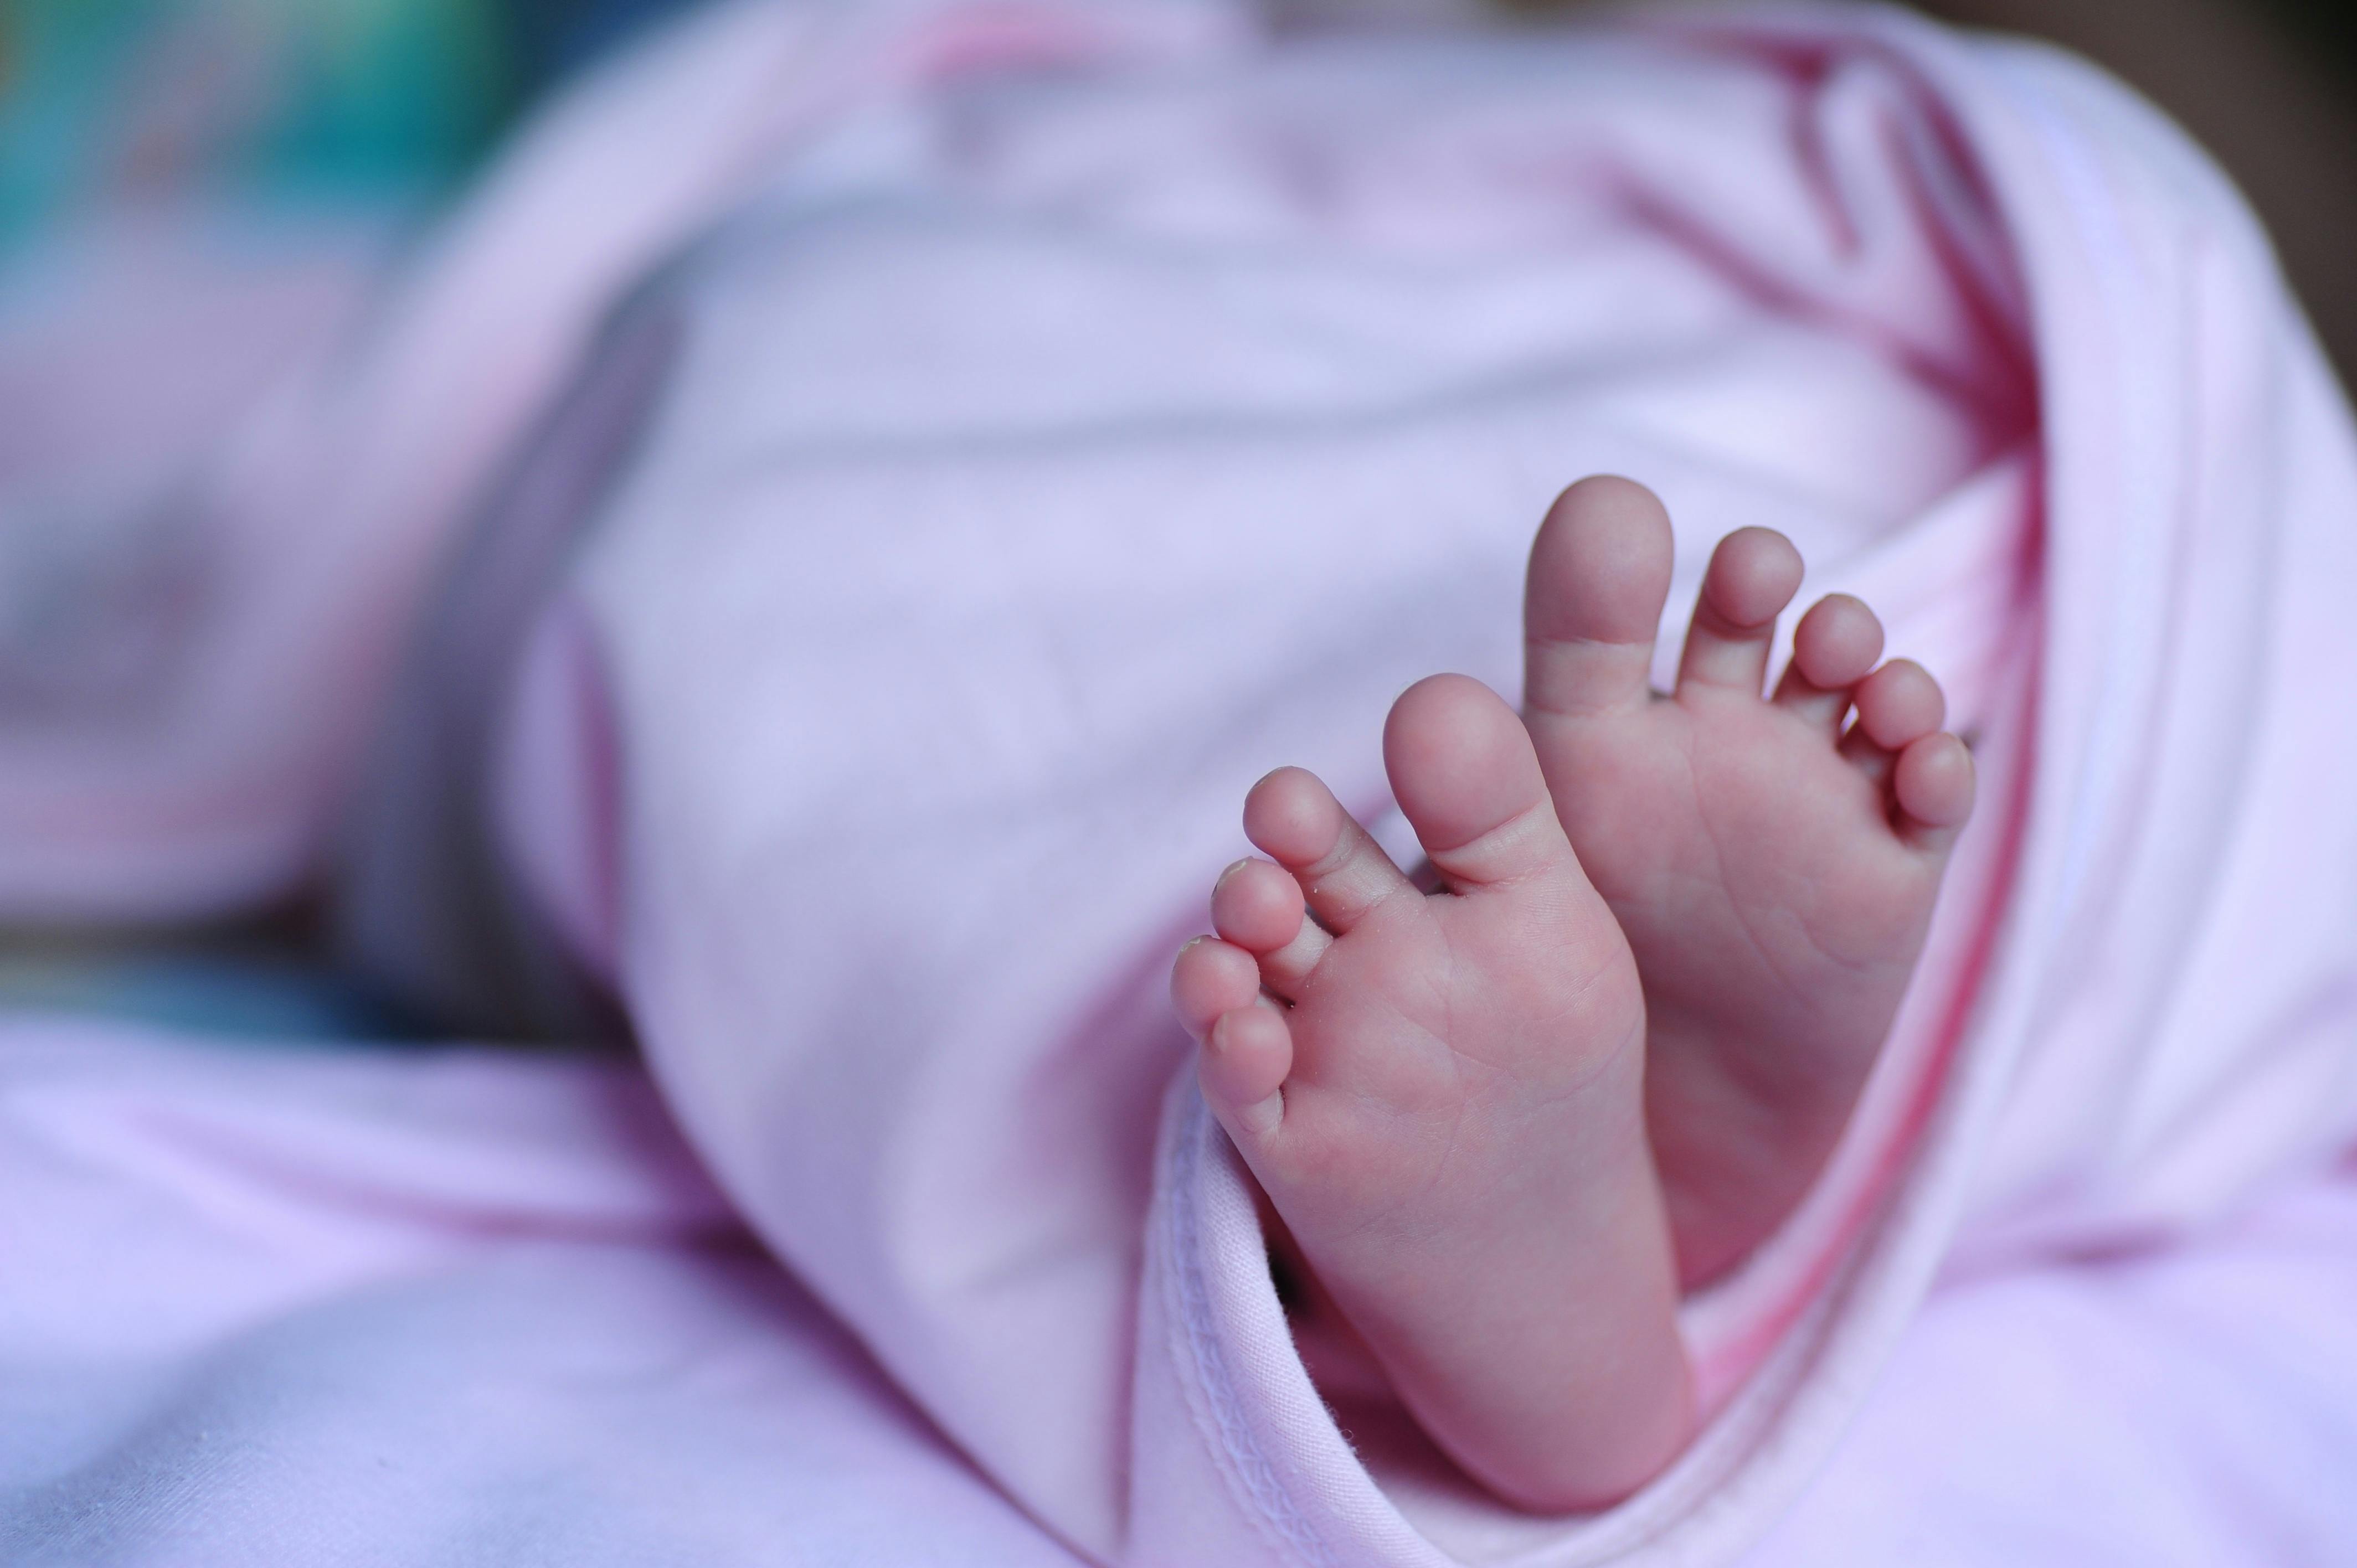 Baby Foot Photos, Download The BEST Free Baby Foot Stock Photos & HD Images